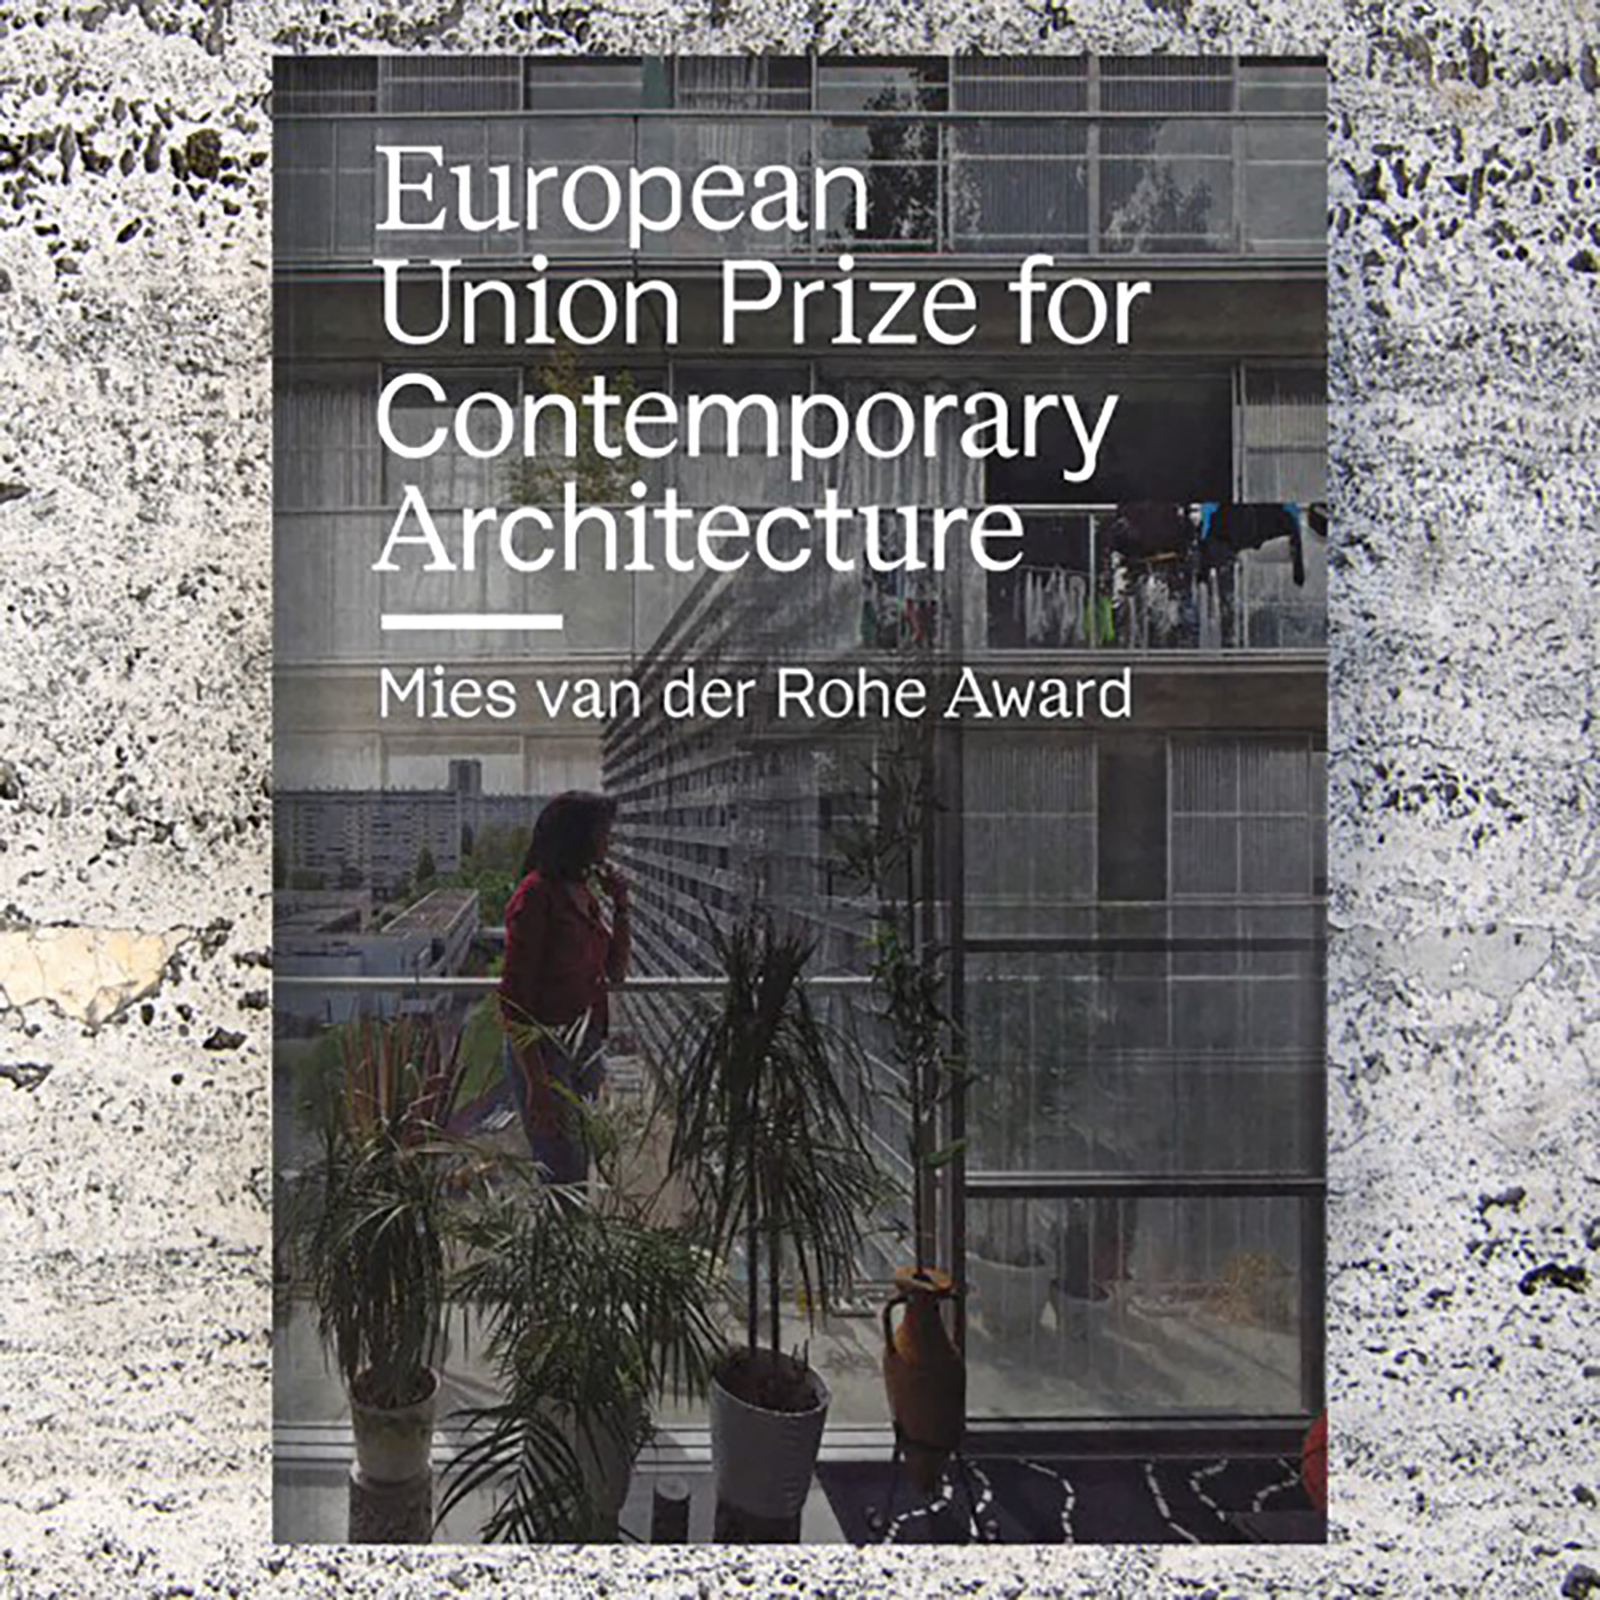 Archisearch EUROPEAN UNION PRIZE FOR CONTEMPORARY ARCHITECTURE – MIES VAN DER ROHE AWARD 2019